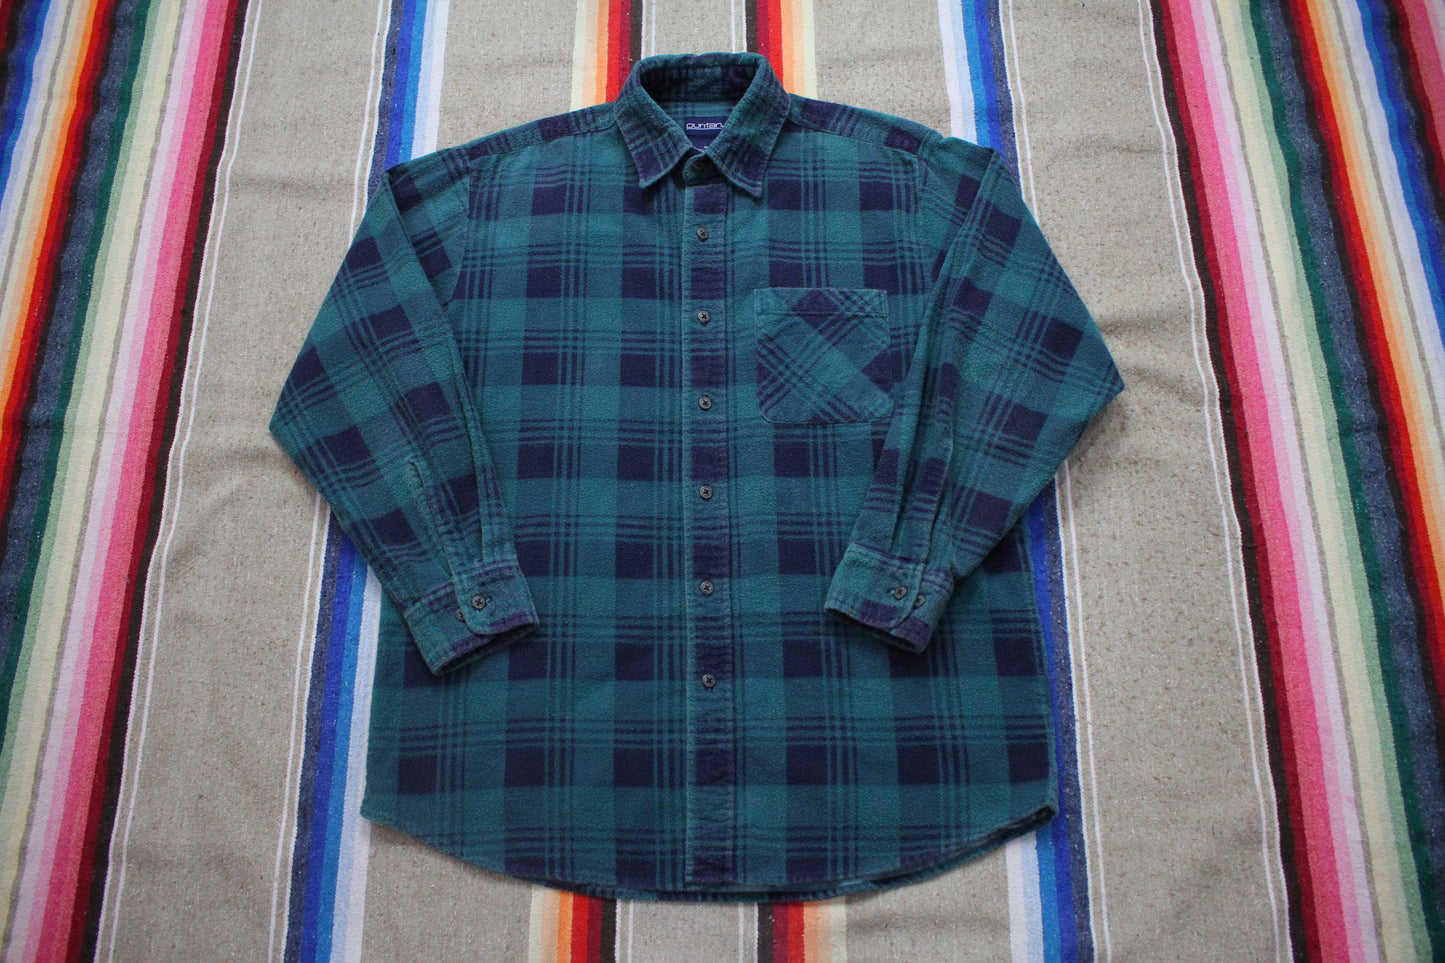 1990s Puritan Blue and Green Plaid Printed Cotton Shirt Size L